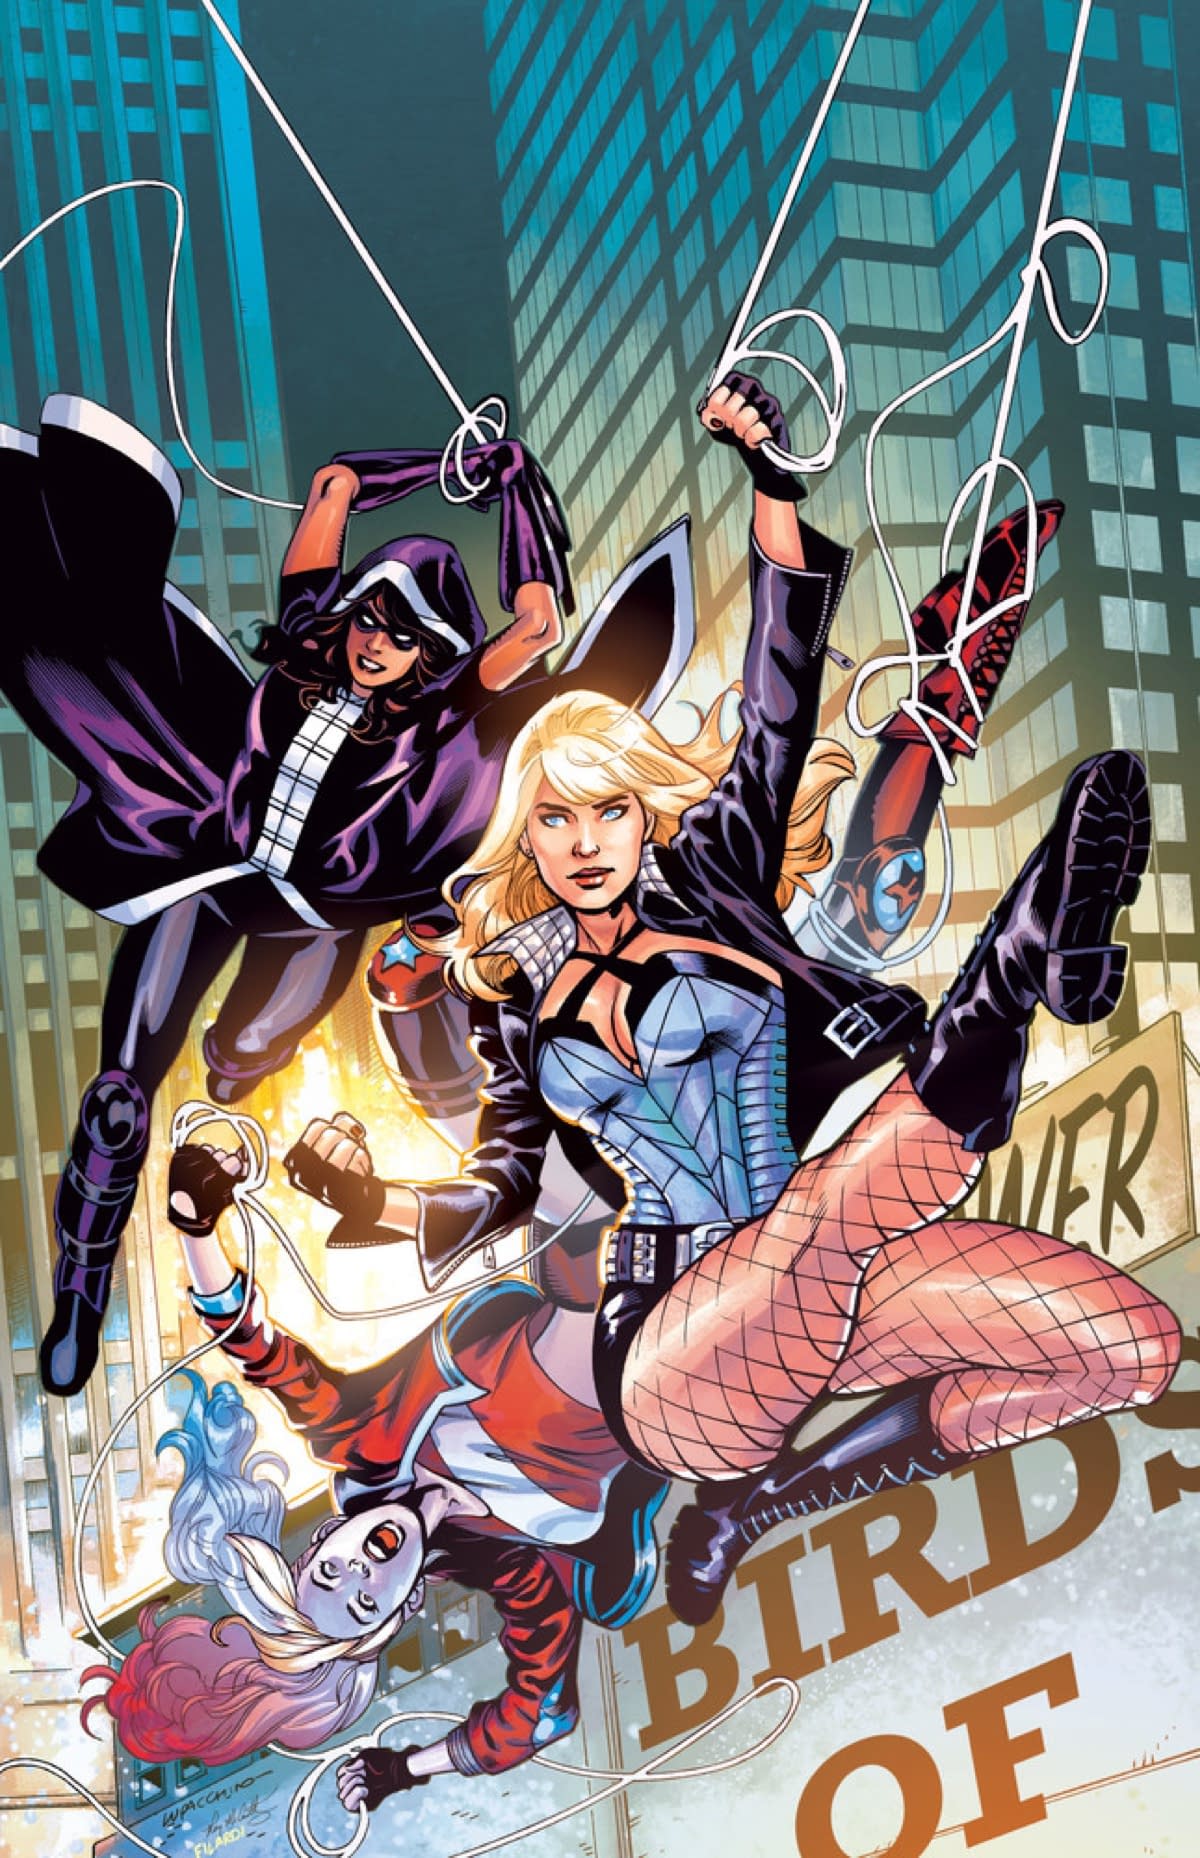 DC to Launch New Birds of Prey Book Book Starring Harley Quinn